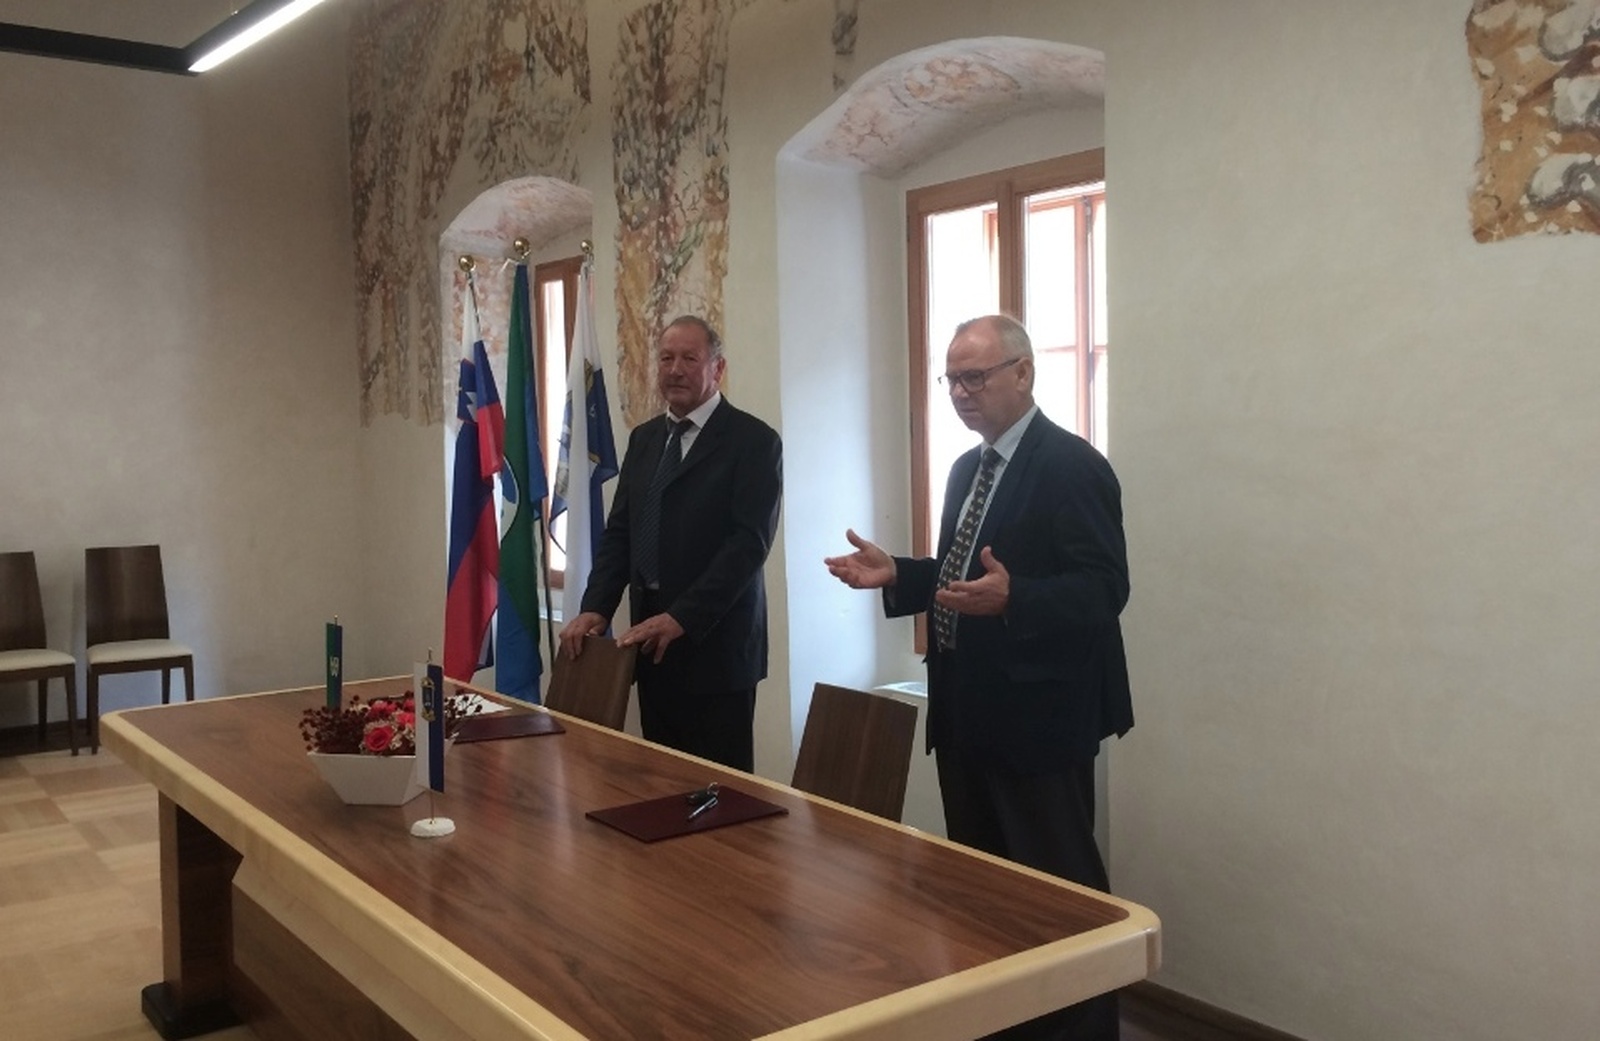 University of Nova Gorica signs annex to long-term agreement on lease and use of the Lanthieri Mansion premises in Vipava